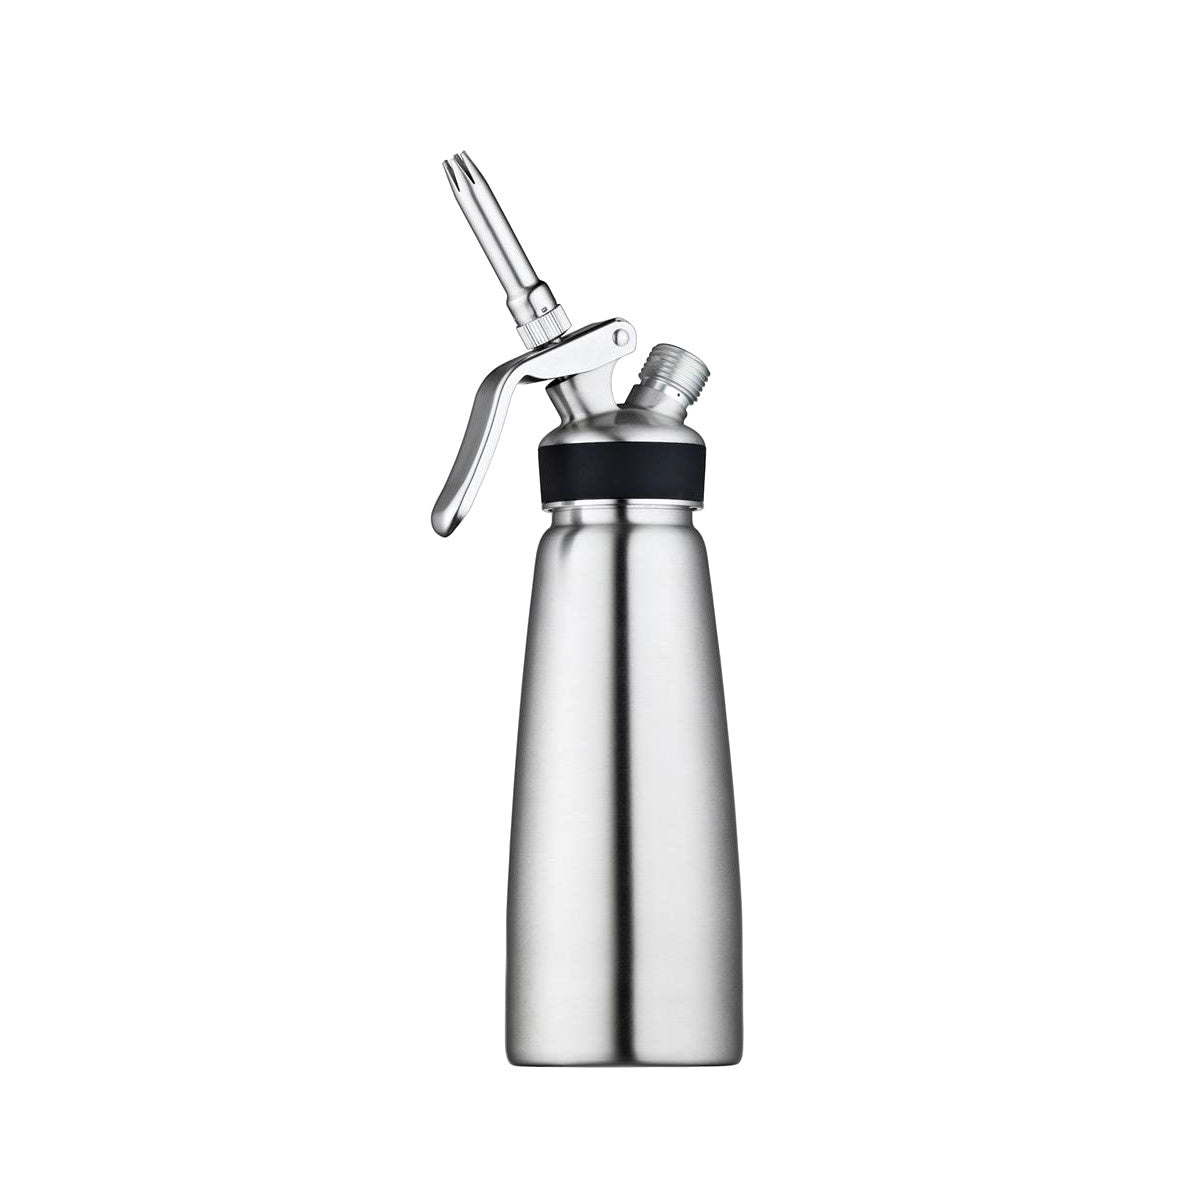 Mosa Tall Pro Cream Whipper Stainless Steel